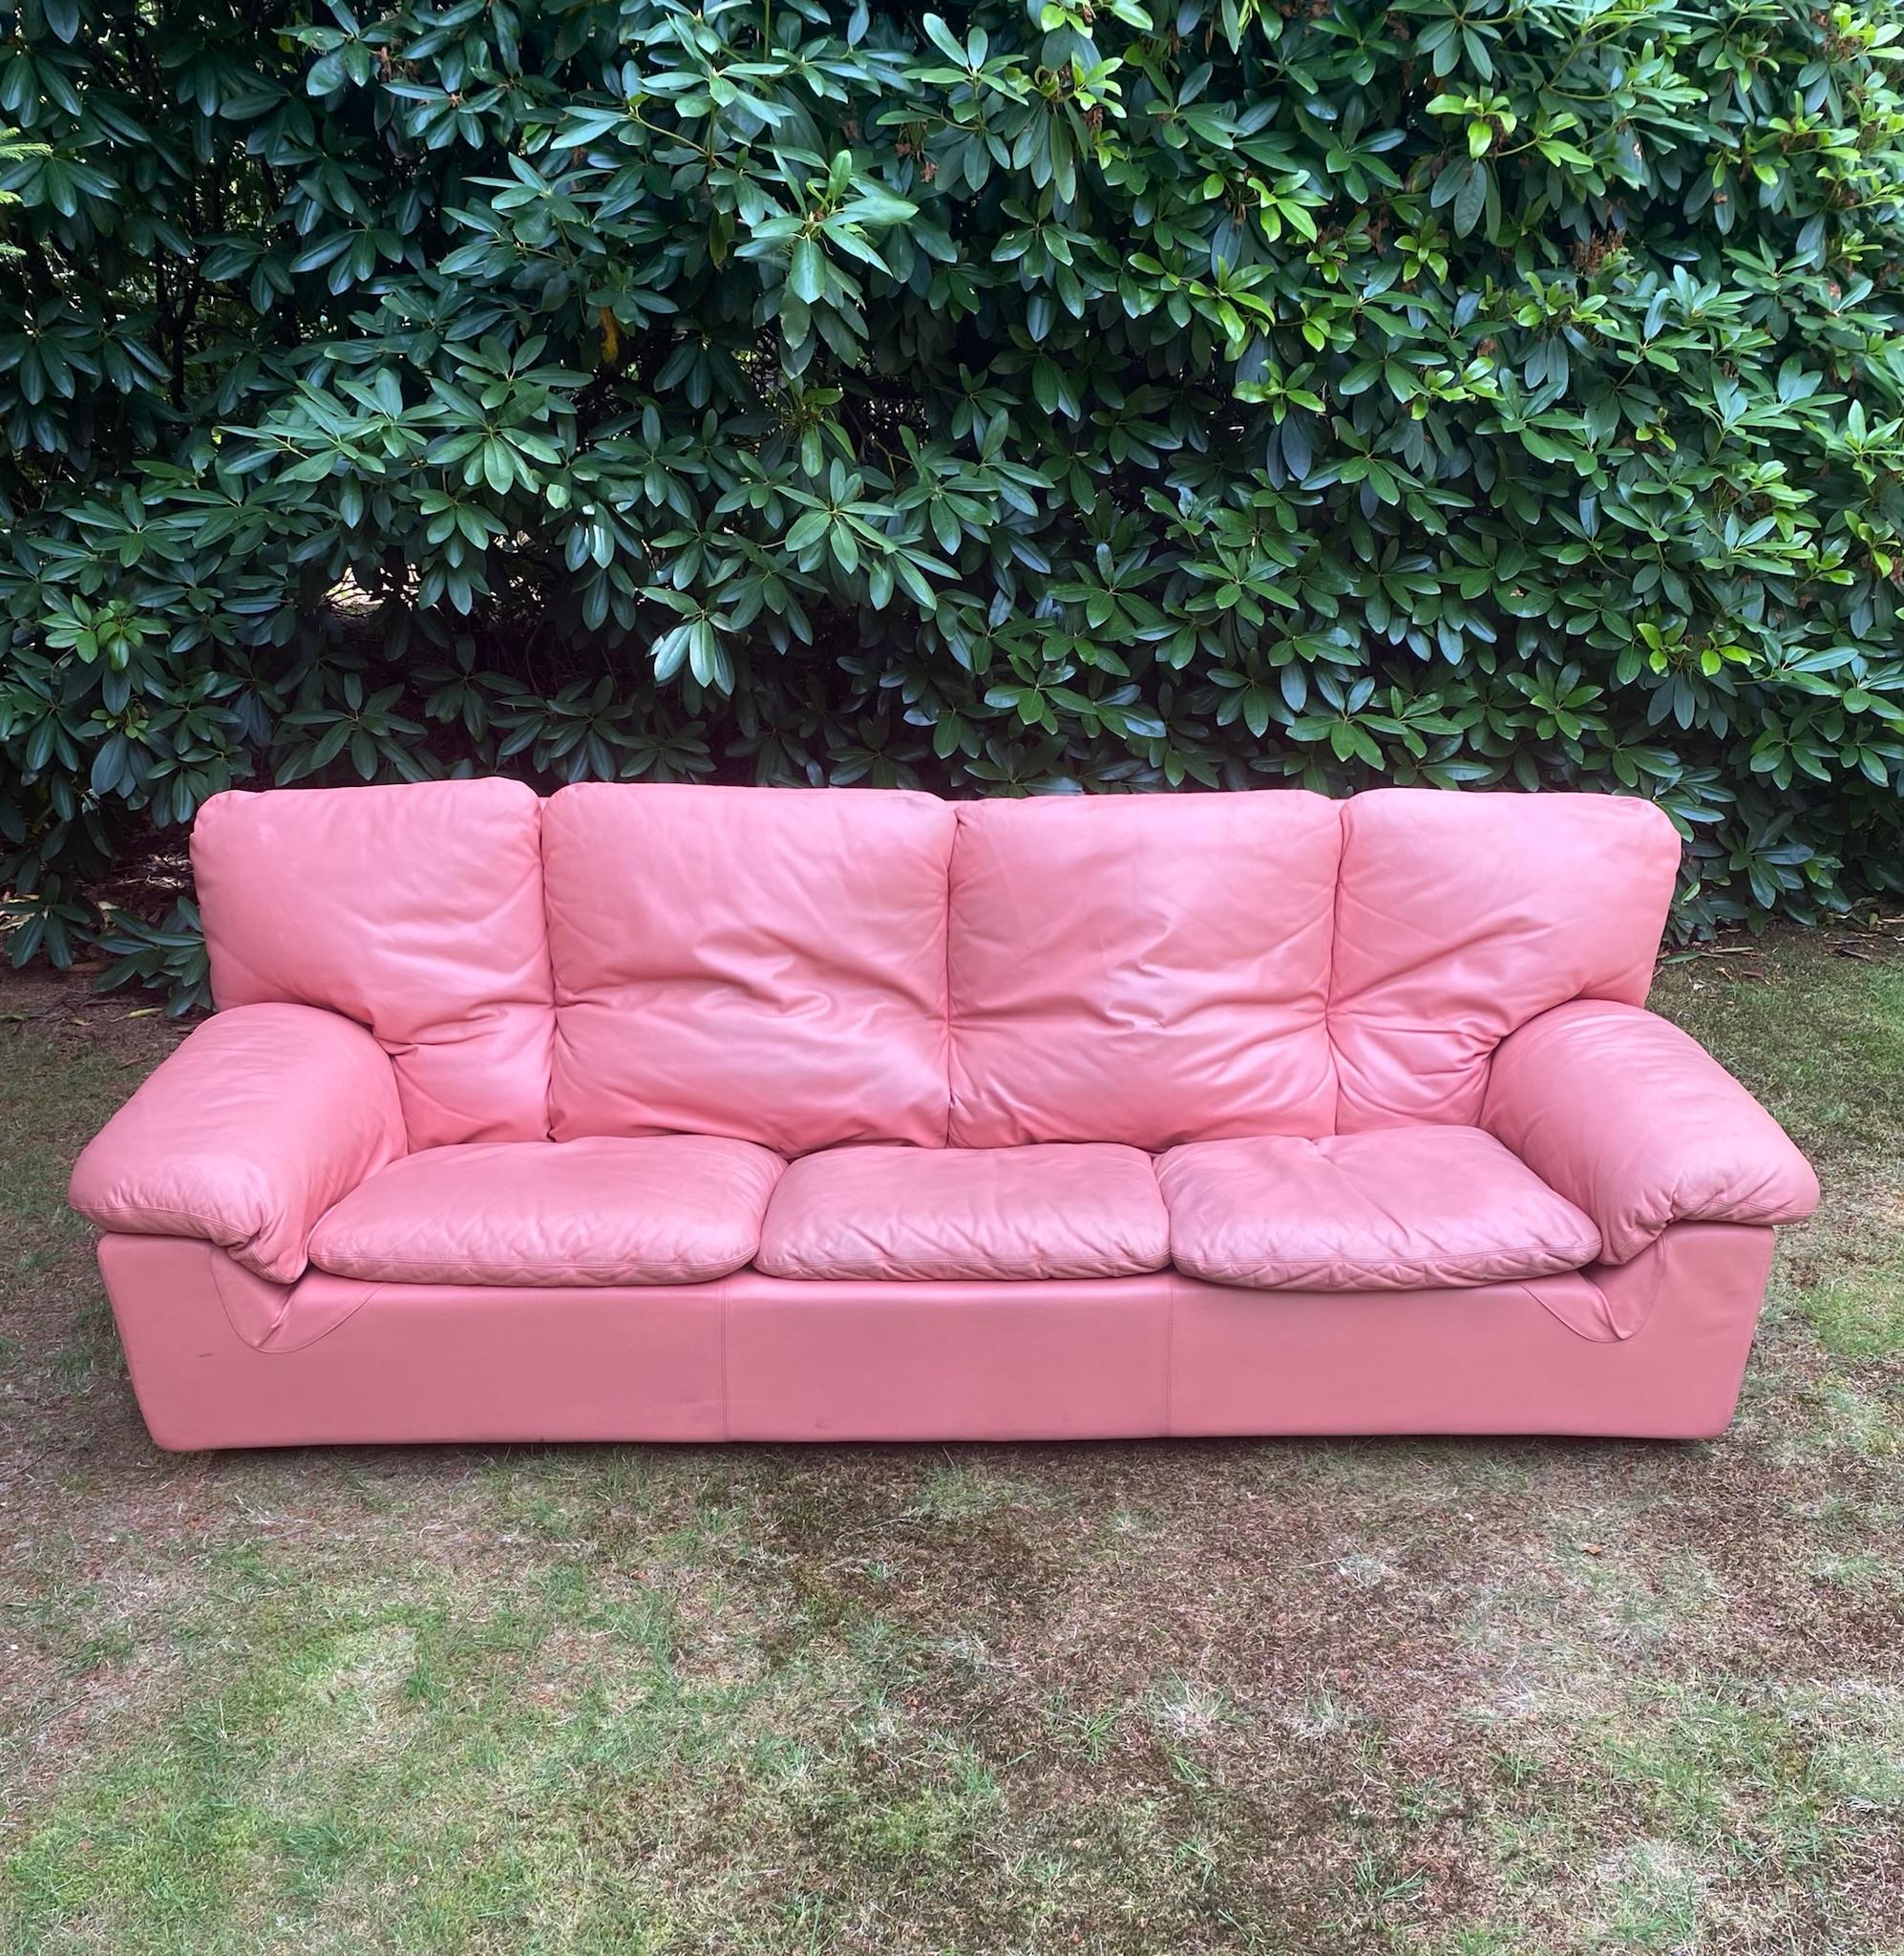 Great large leather sofa in Salmon-Pink Pastel and typical 1980s color. The sofa remains in good condition with some slight differences in color and other wear consisting with age and use (see:images). An advantage is that most of the cushions are